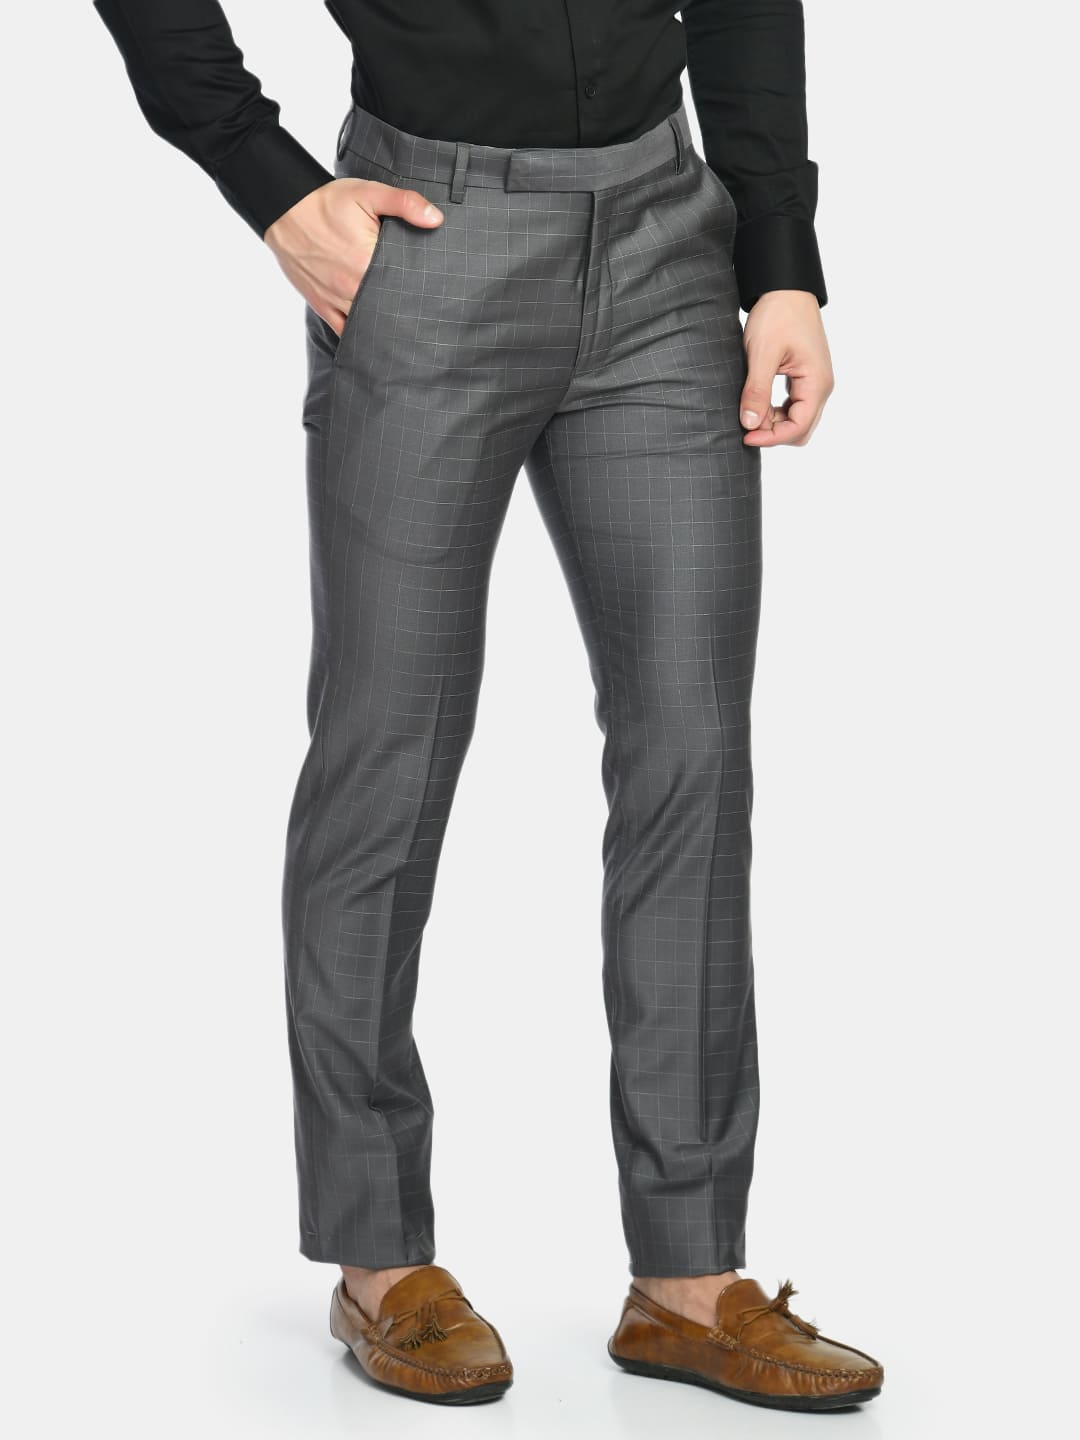 Buy Cliths Men's Slim Fit Formal Trousers (CL-TR-Black8_28_Black_28) at  Amazon.in